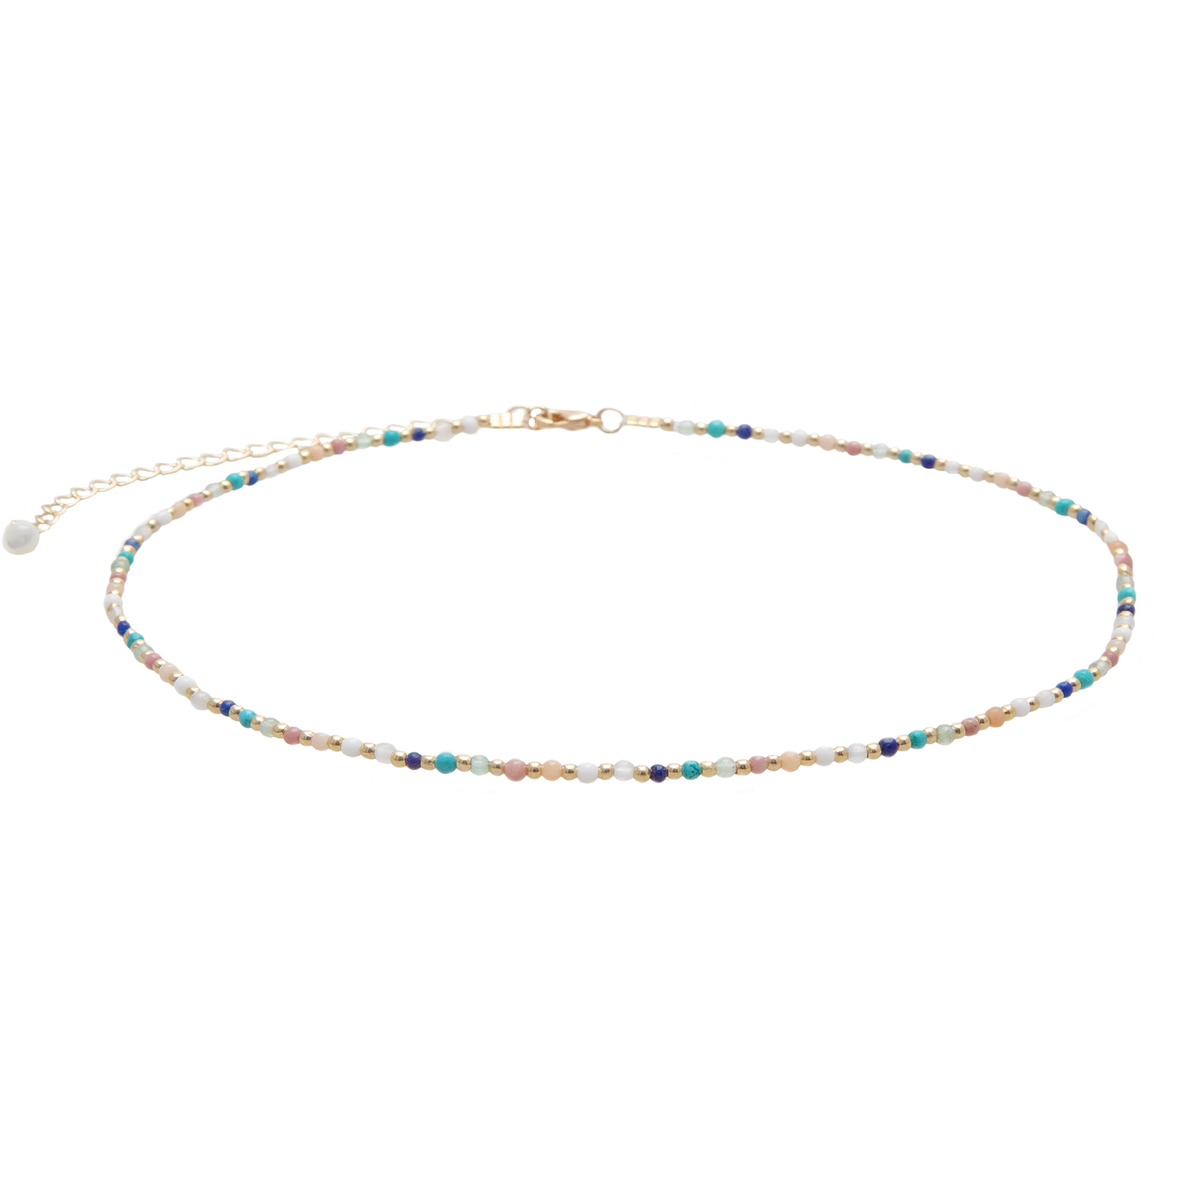 2mm multicolor stone and gold bead healing necklace with gold chain